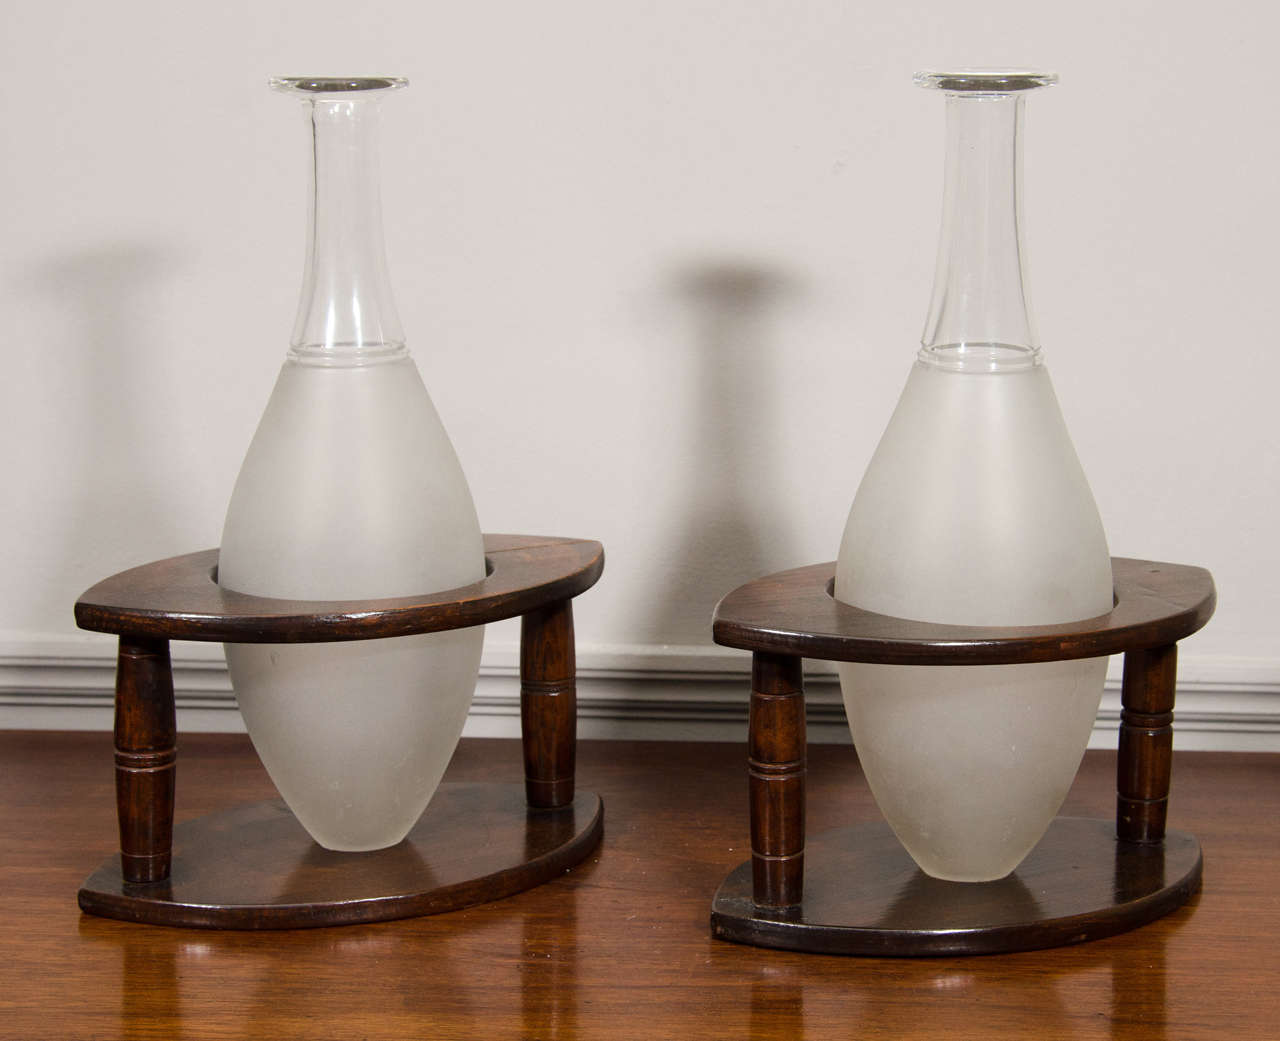 Pair of Hoggit decanters in wooden stands.